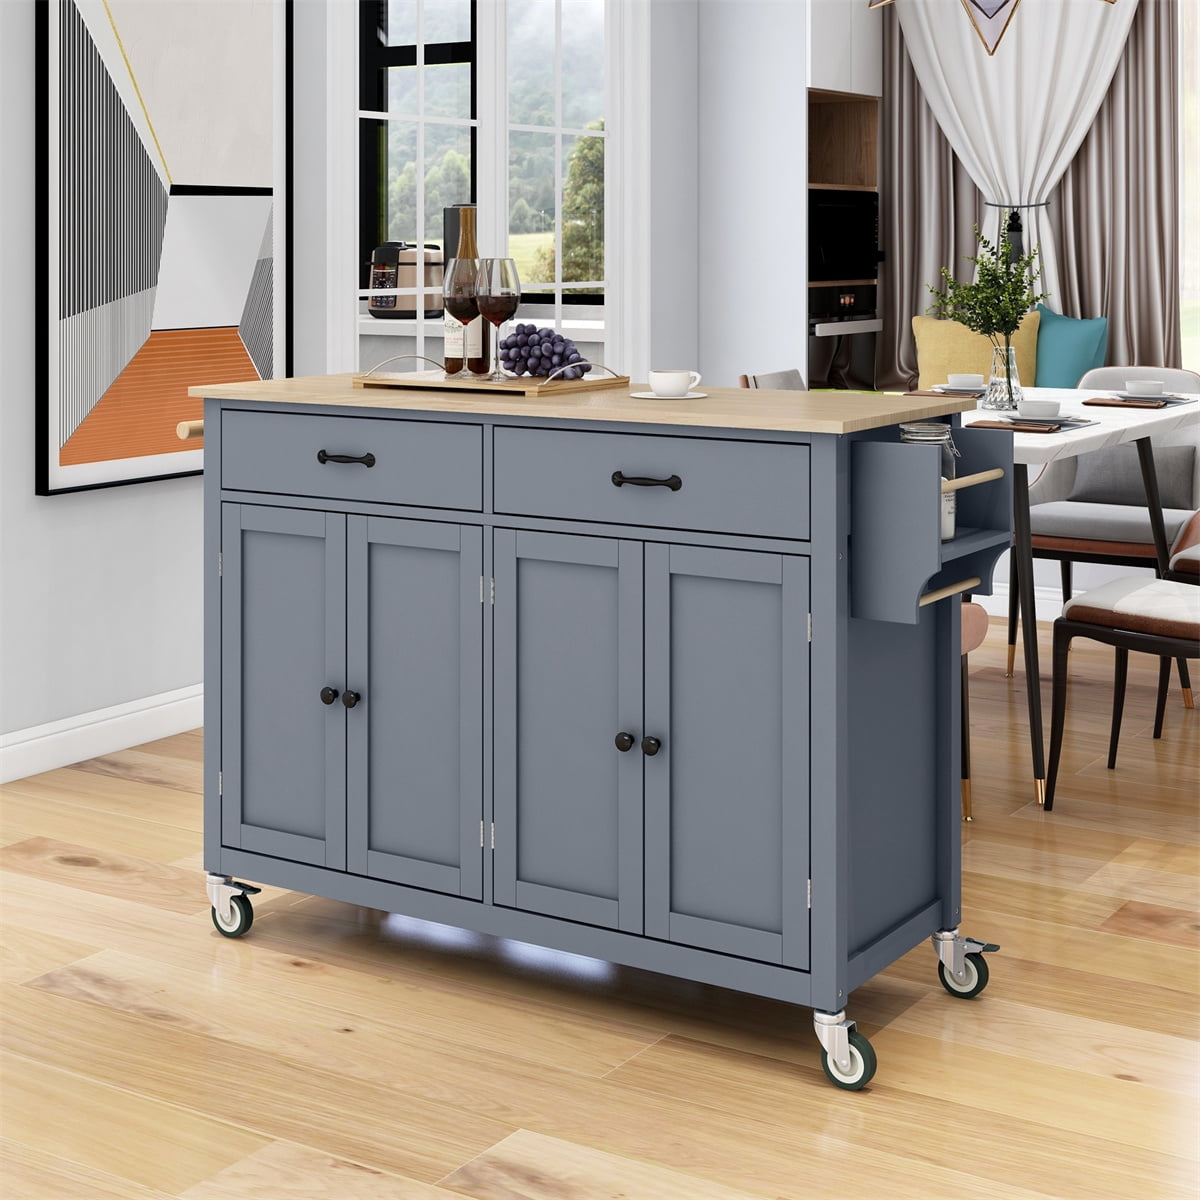 Grey Full Size Portable Kitchen Cart with Counter Top in Multiple Finishes:  Spice Rack and Towel Bar Included Measuring 51-1/2'' W x 18'' D x 34'' H By  Crosley Furniture